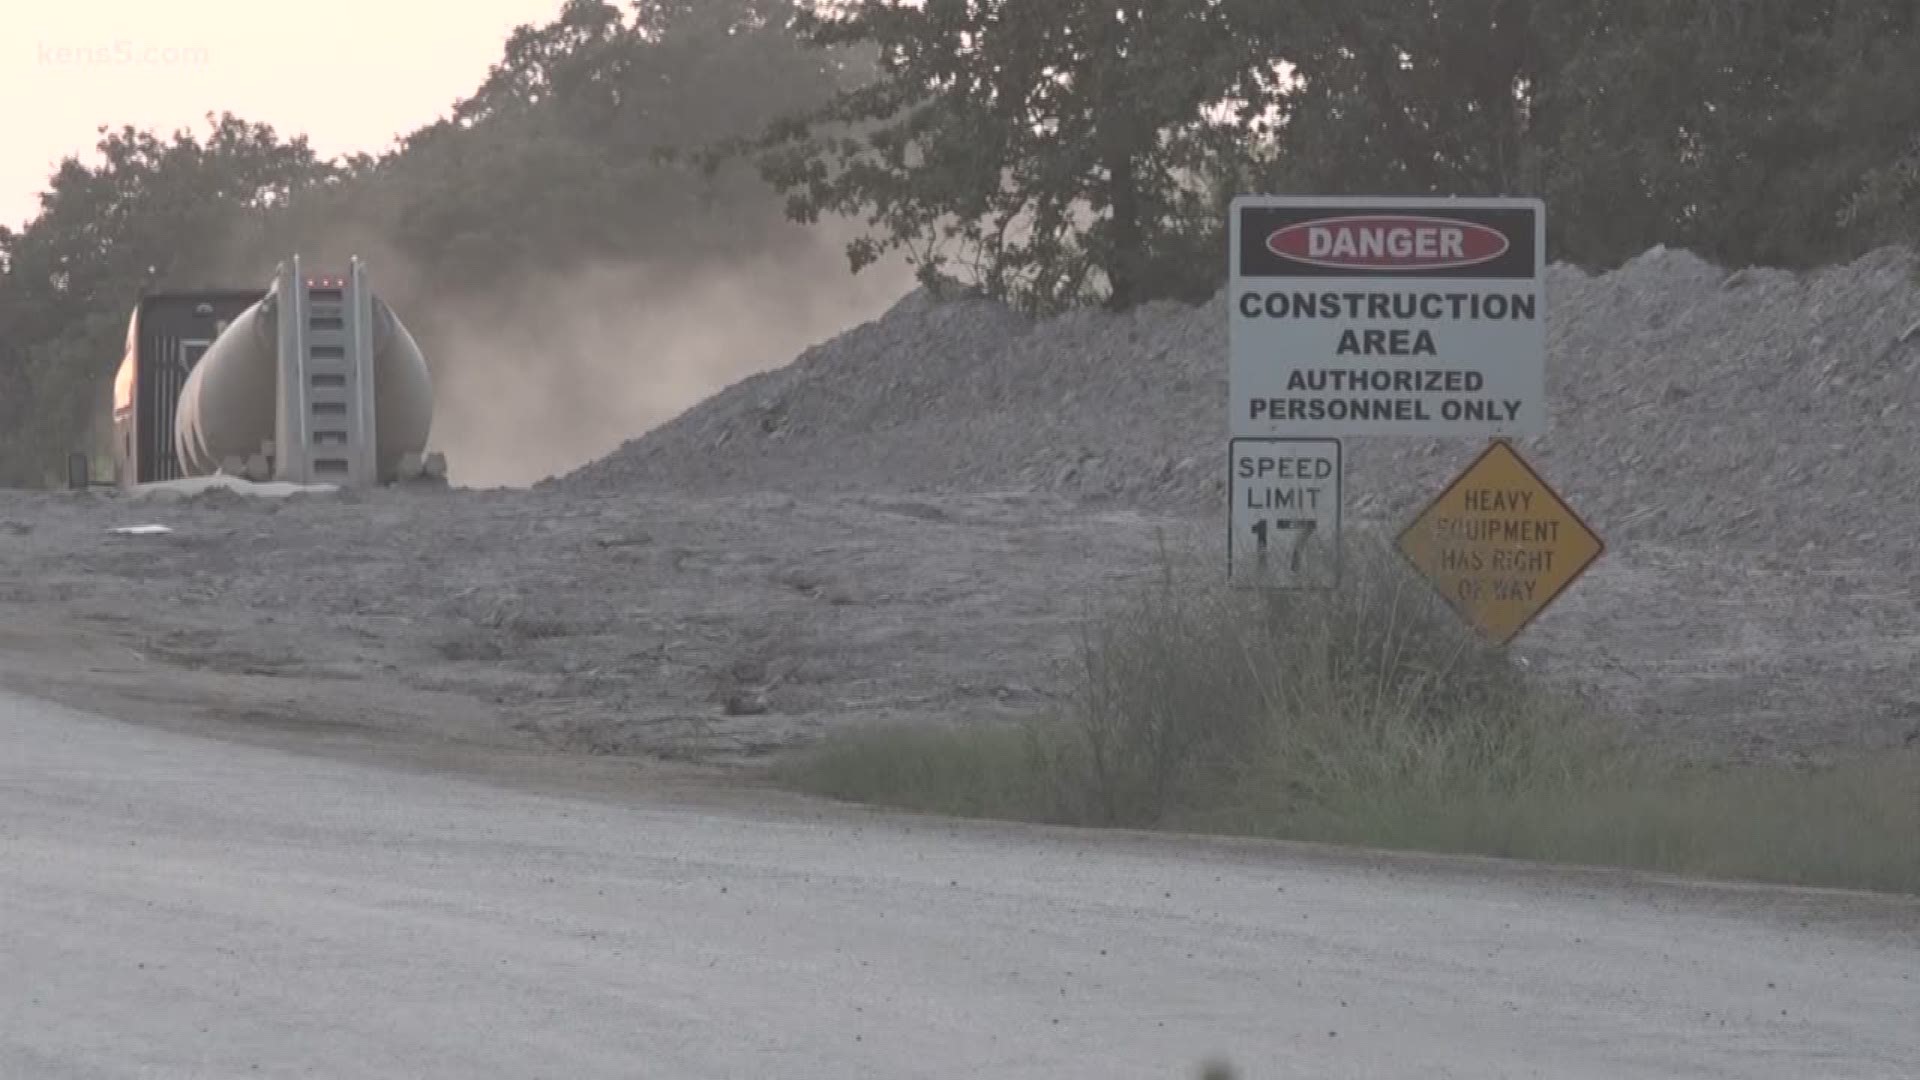 The byproducts of a sand mine company's operations not far from a middle school has sparked concerns among community members about potential health hazards.